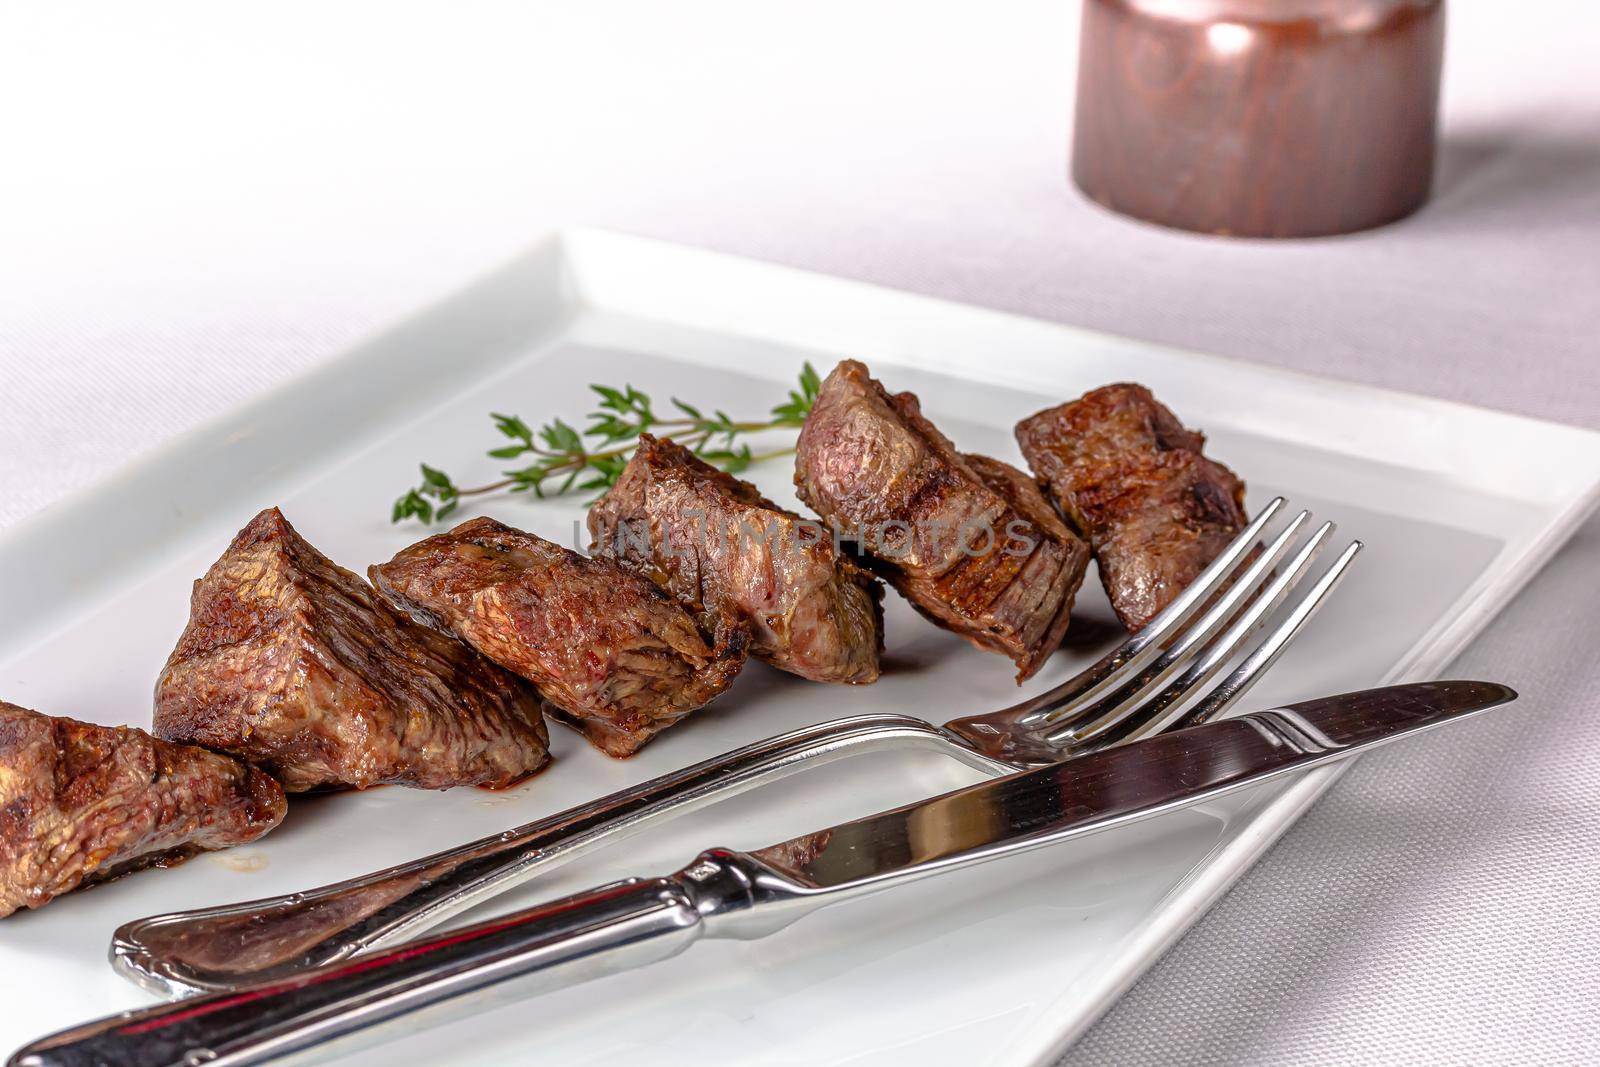 Beef kebab with tomato sauce with vegetables is on a plate